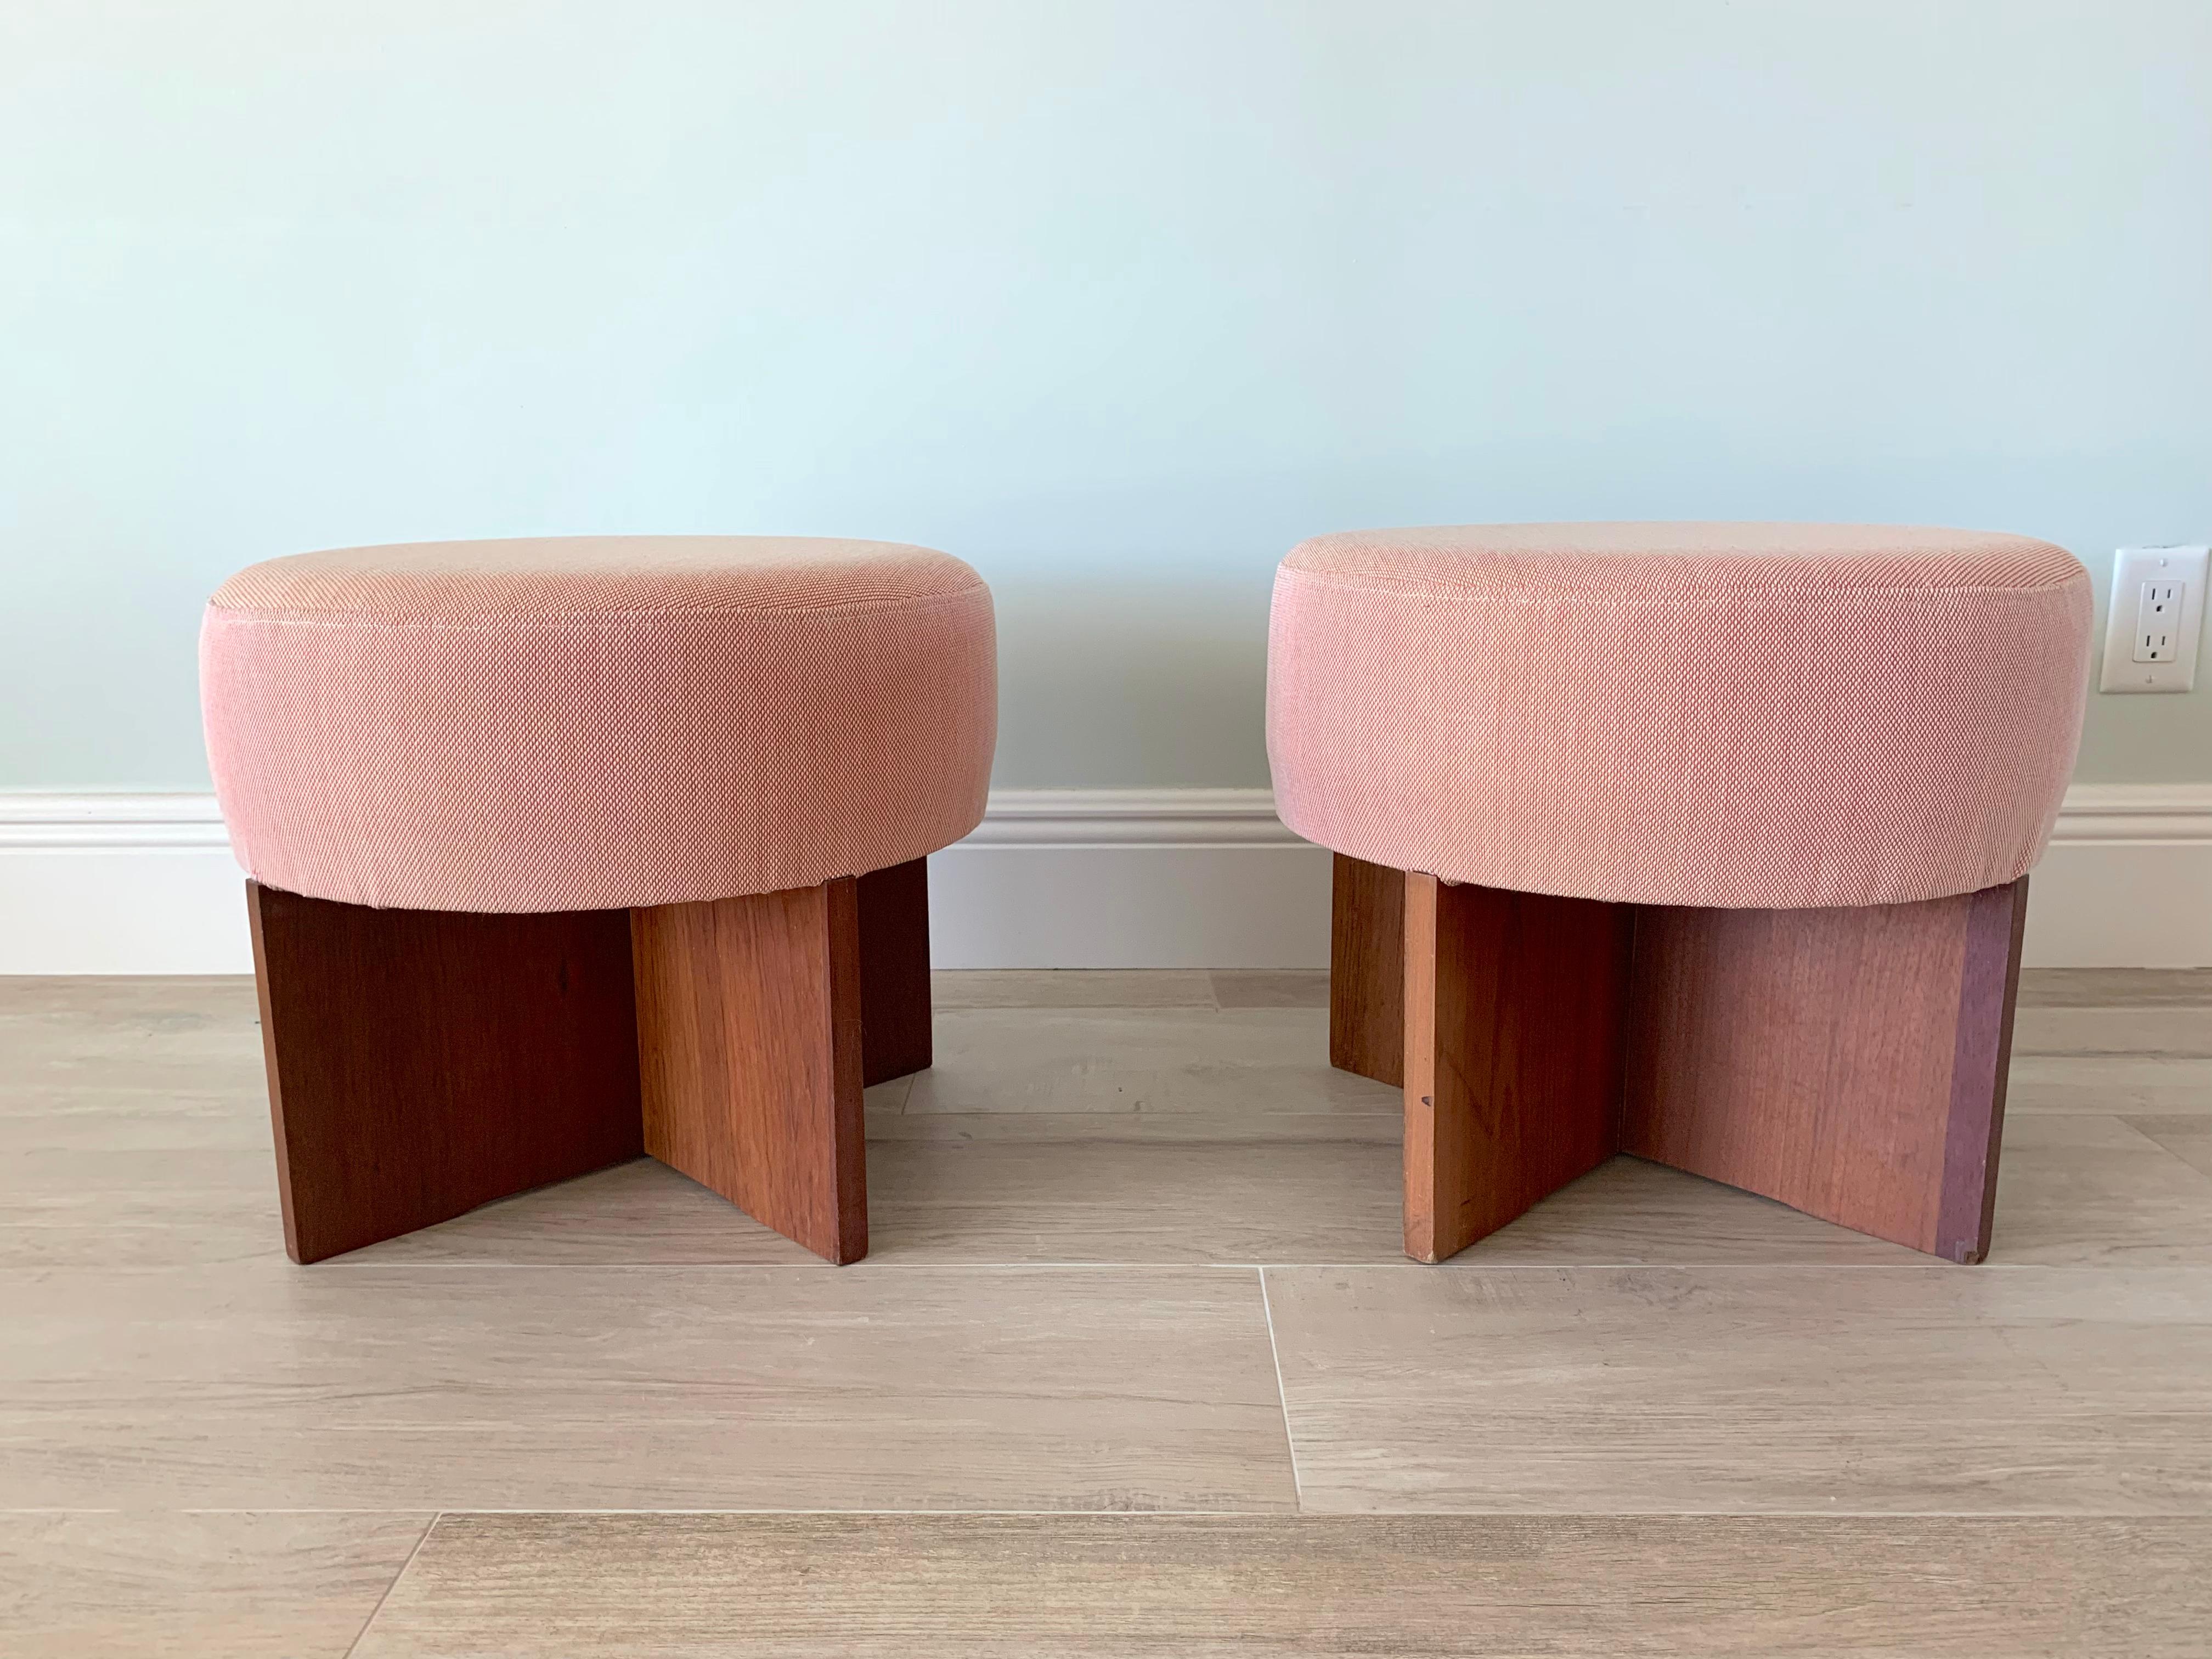 American Set of Two Mid-Century Modern Stools in Mahogany, USA, 1950s